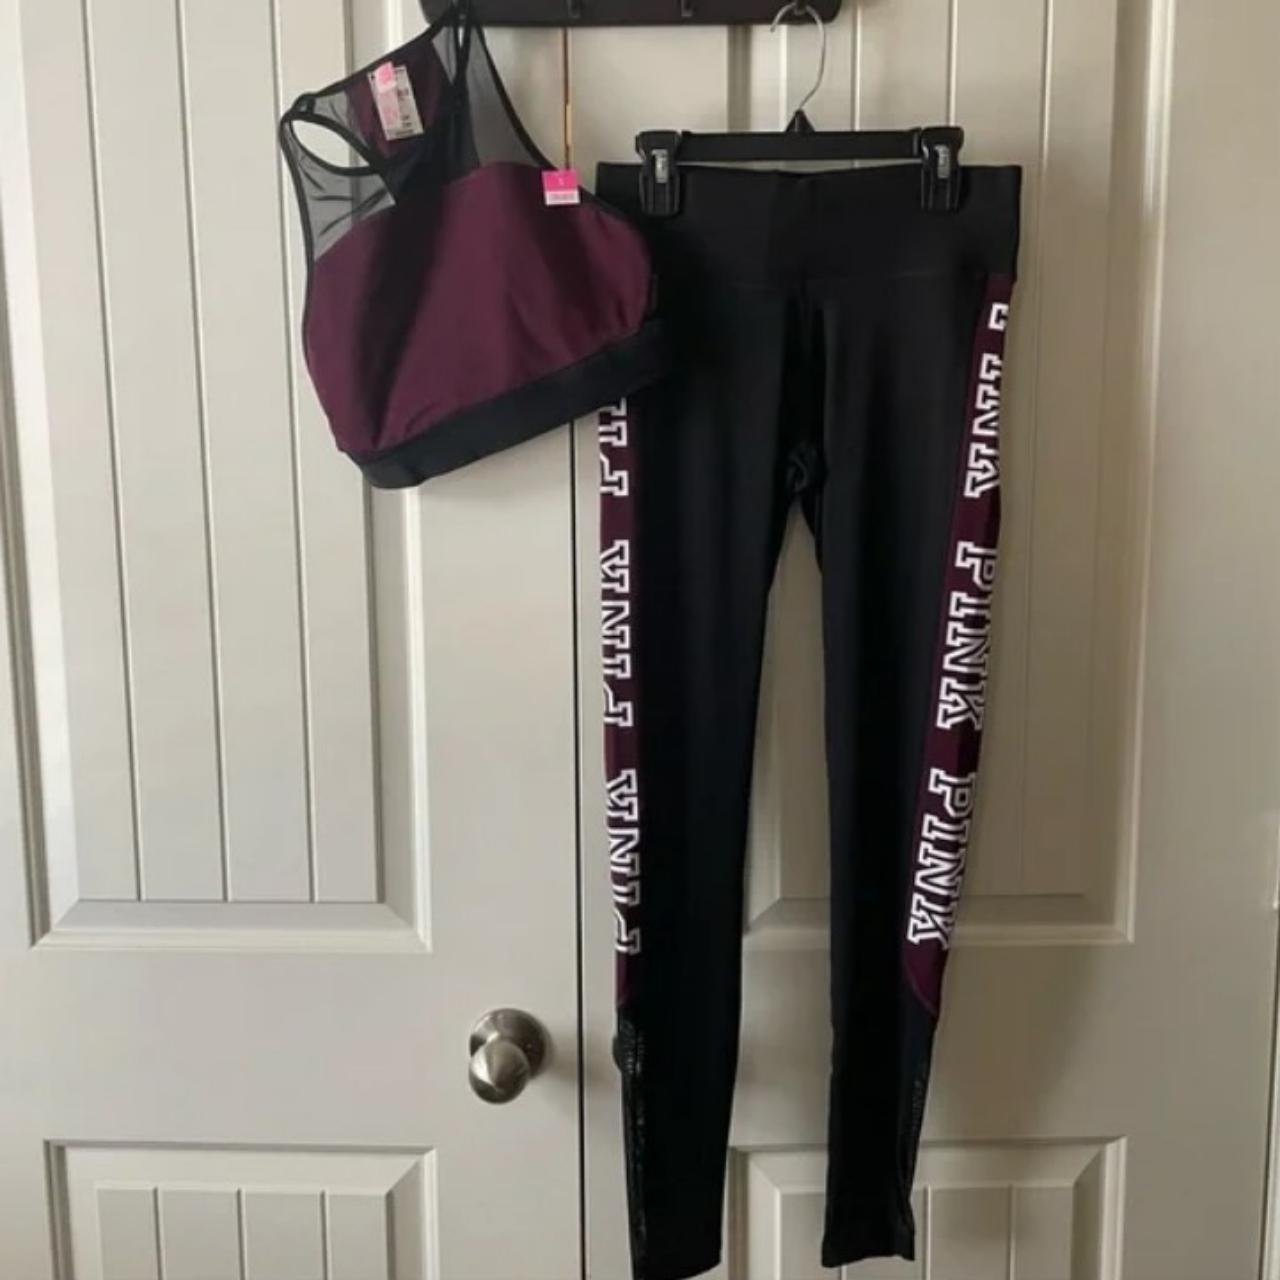 Ultimate leggings with matching sports bra. This - Depop